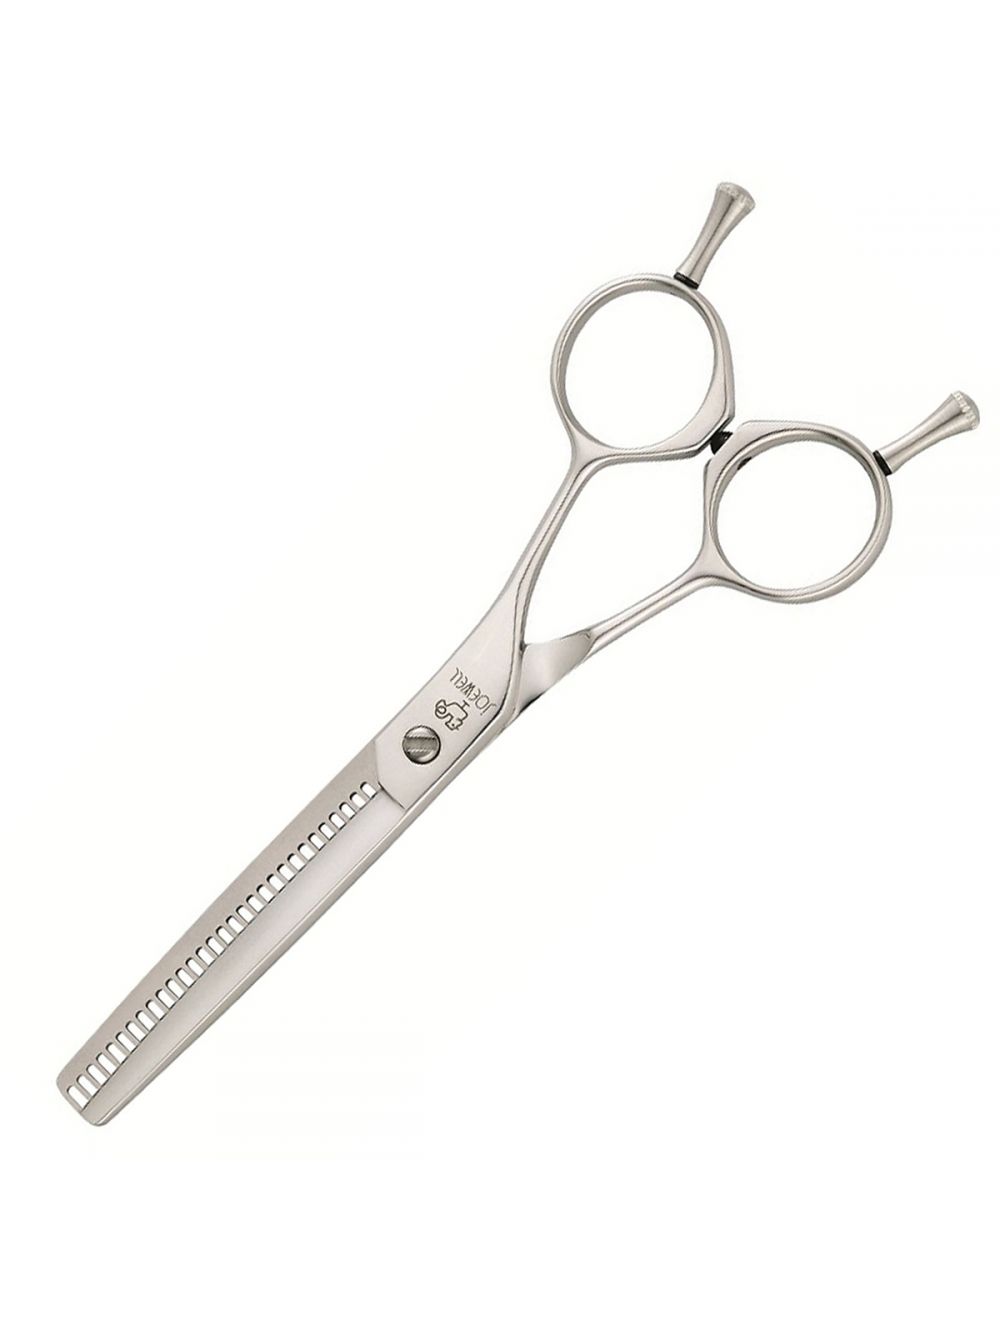 Joewell E30 Thinning Scissors, 5.6" - Ultimate Hair and Beauty